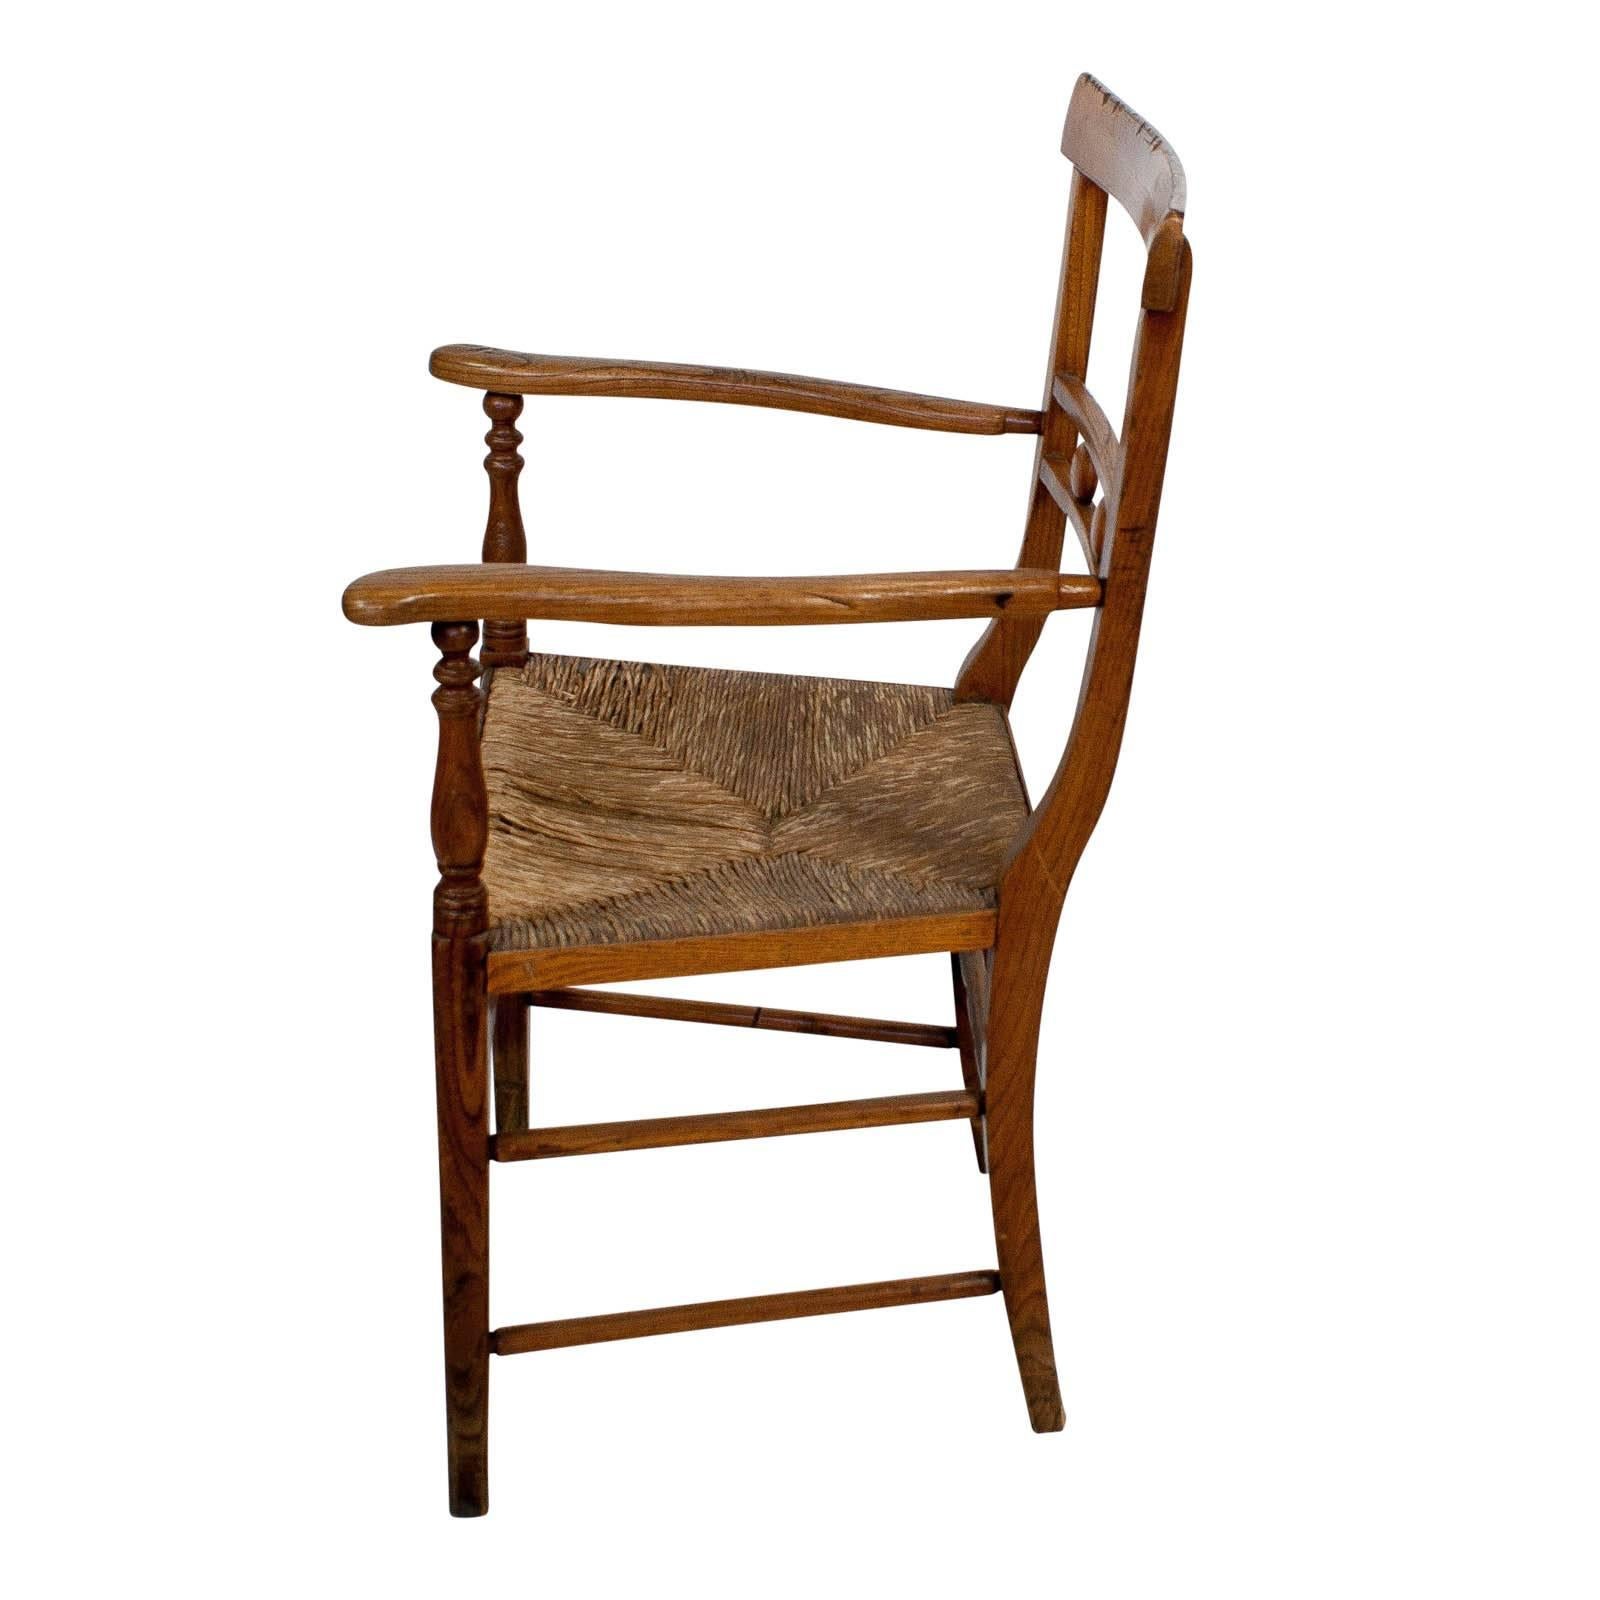 Mid-19th Century Provincial French Fruitwood Armchair, circa 1830